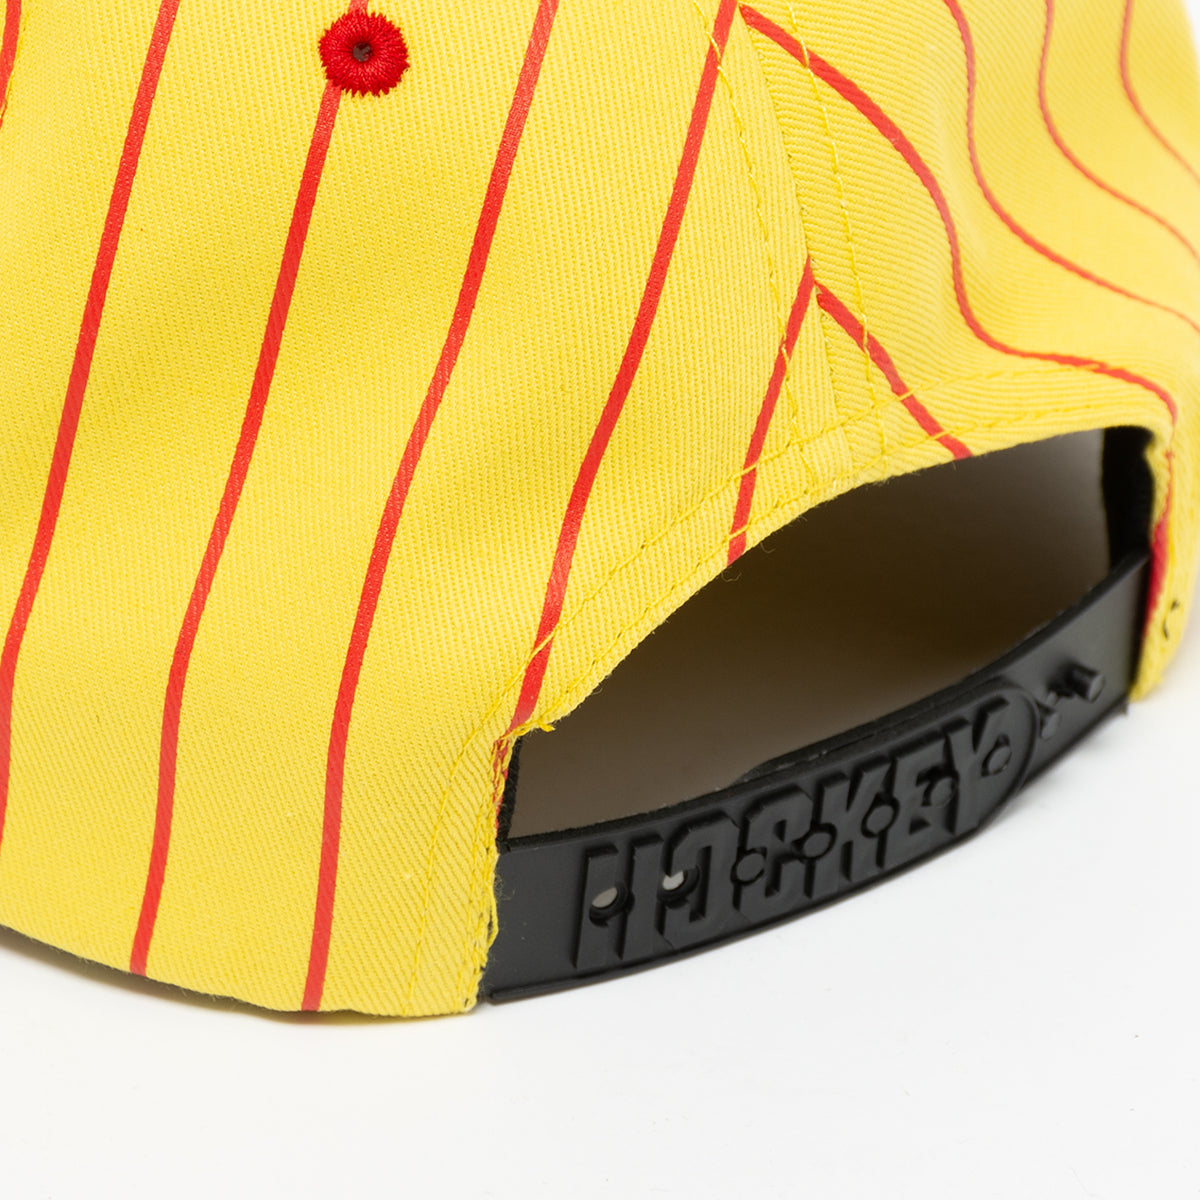 Striped Snapback (Yellow/Red)